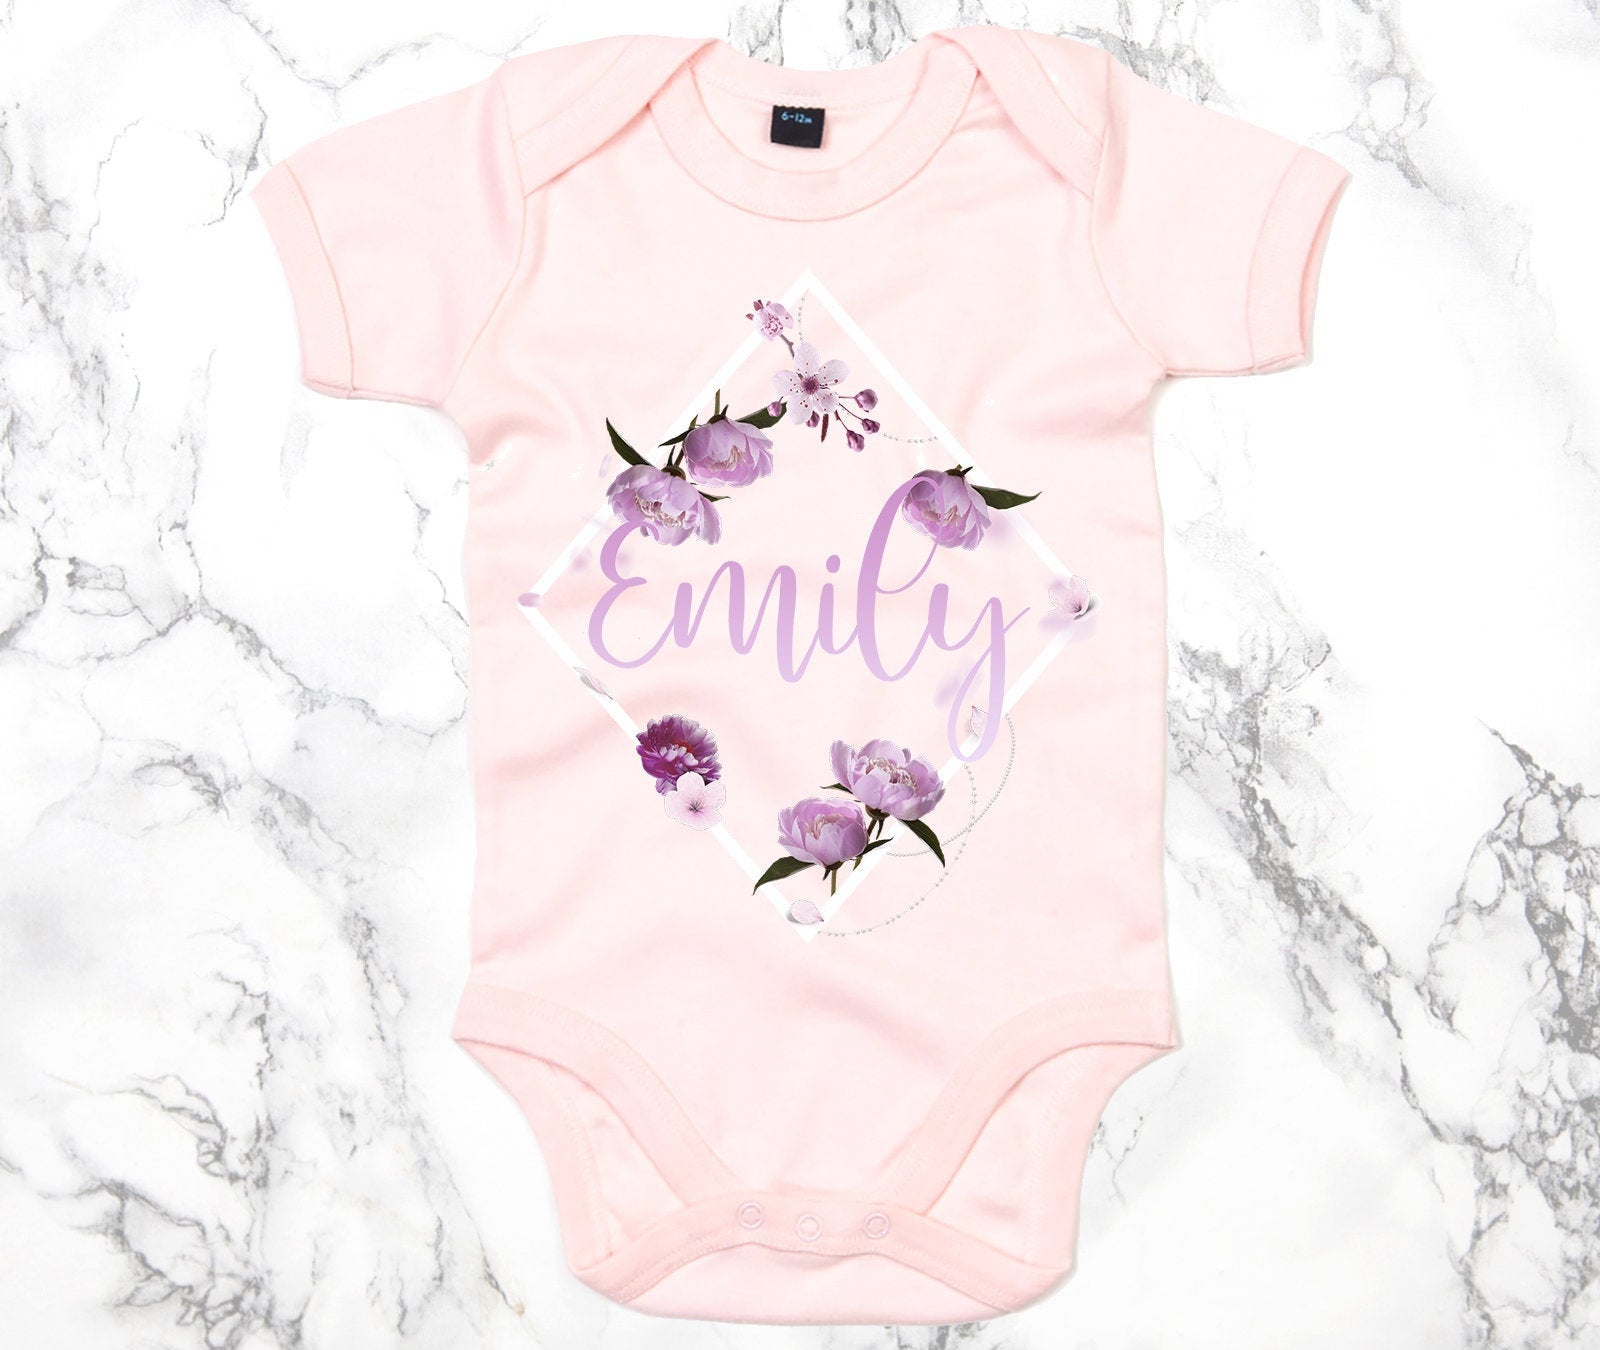 personalised baby grow